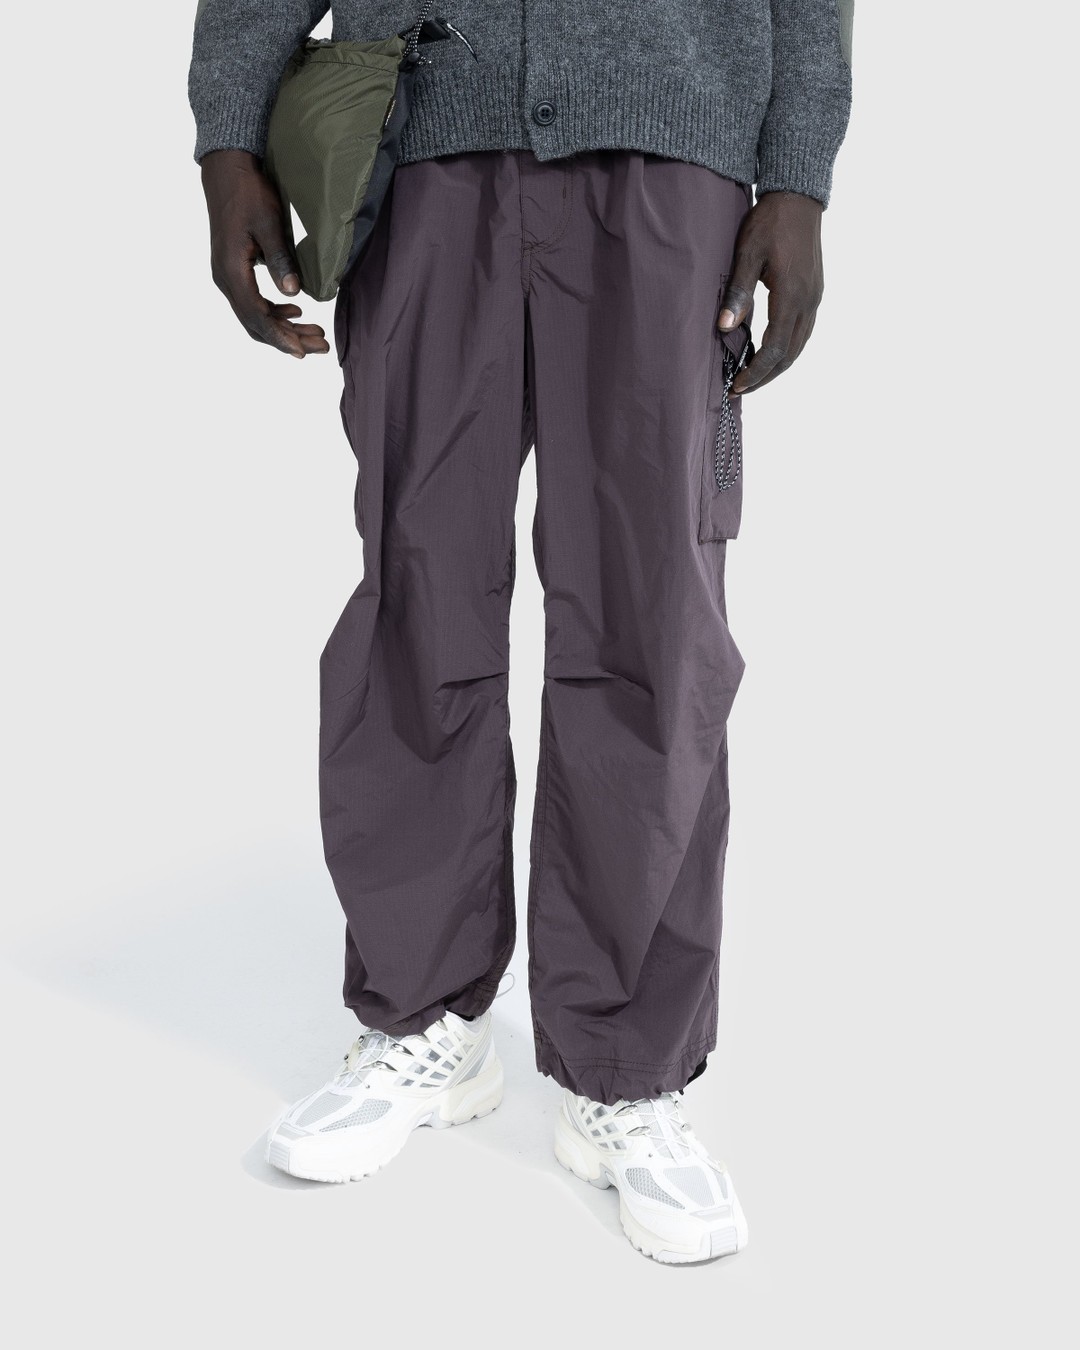 And Wander – Oversized Cargo Pants Brown | Highsnobiety Shop